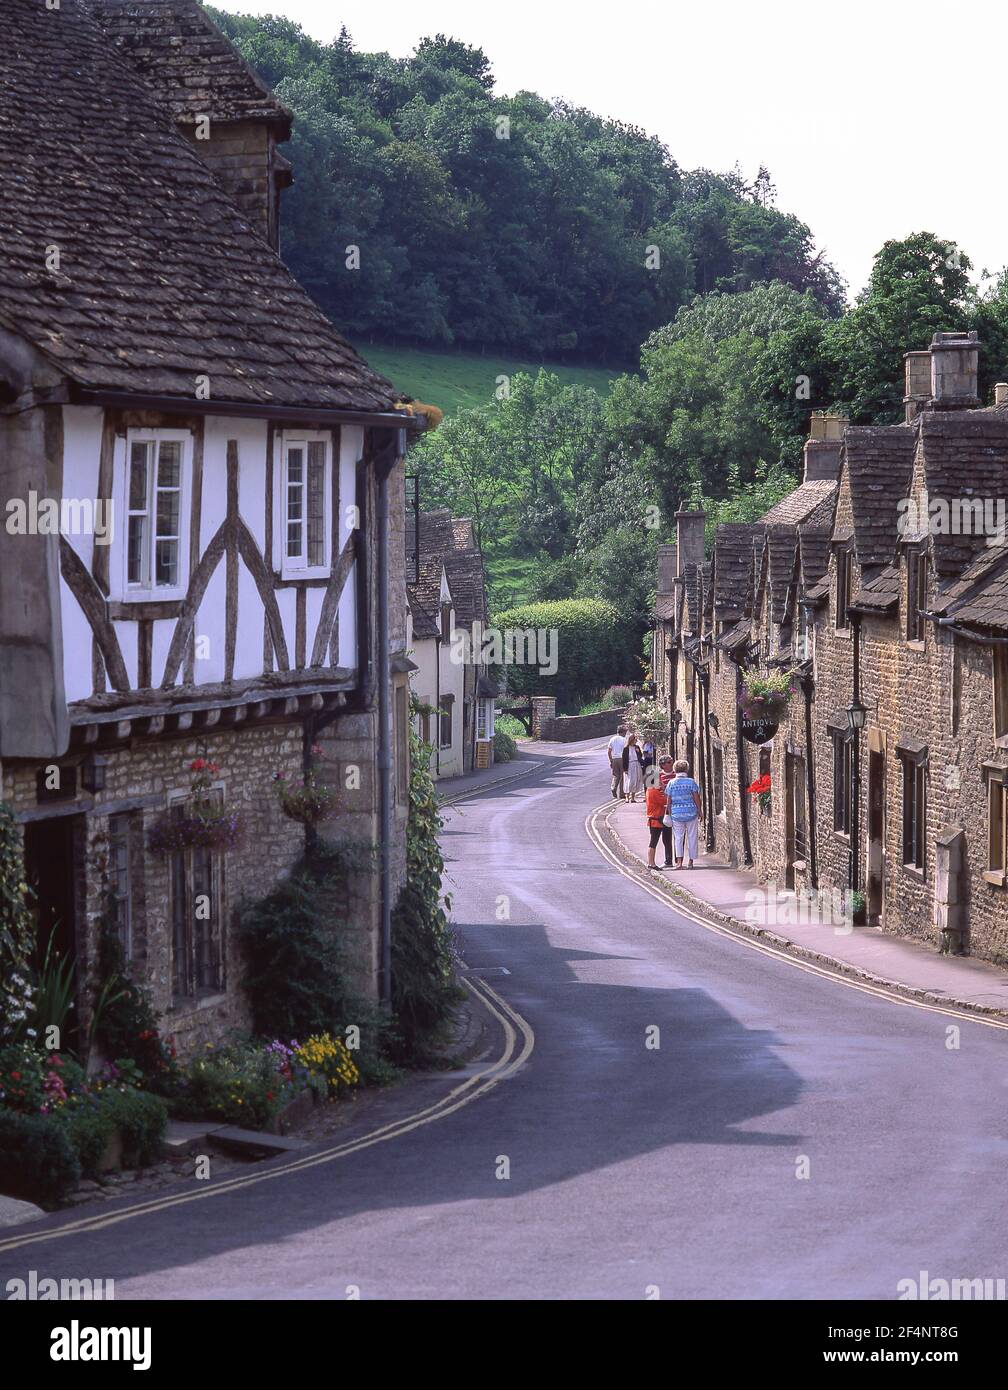 The Street, Castle Combe, Wiltshire, Angleterre, Royaume-Uni Banque D'Images